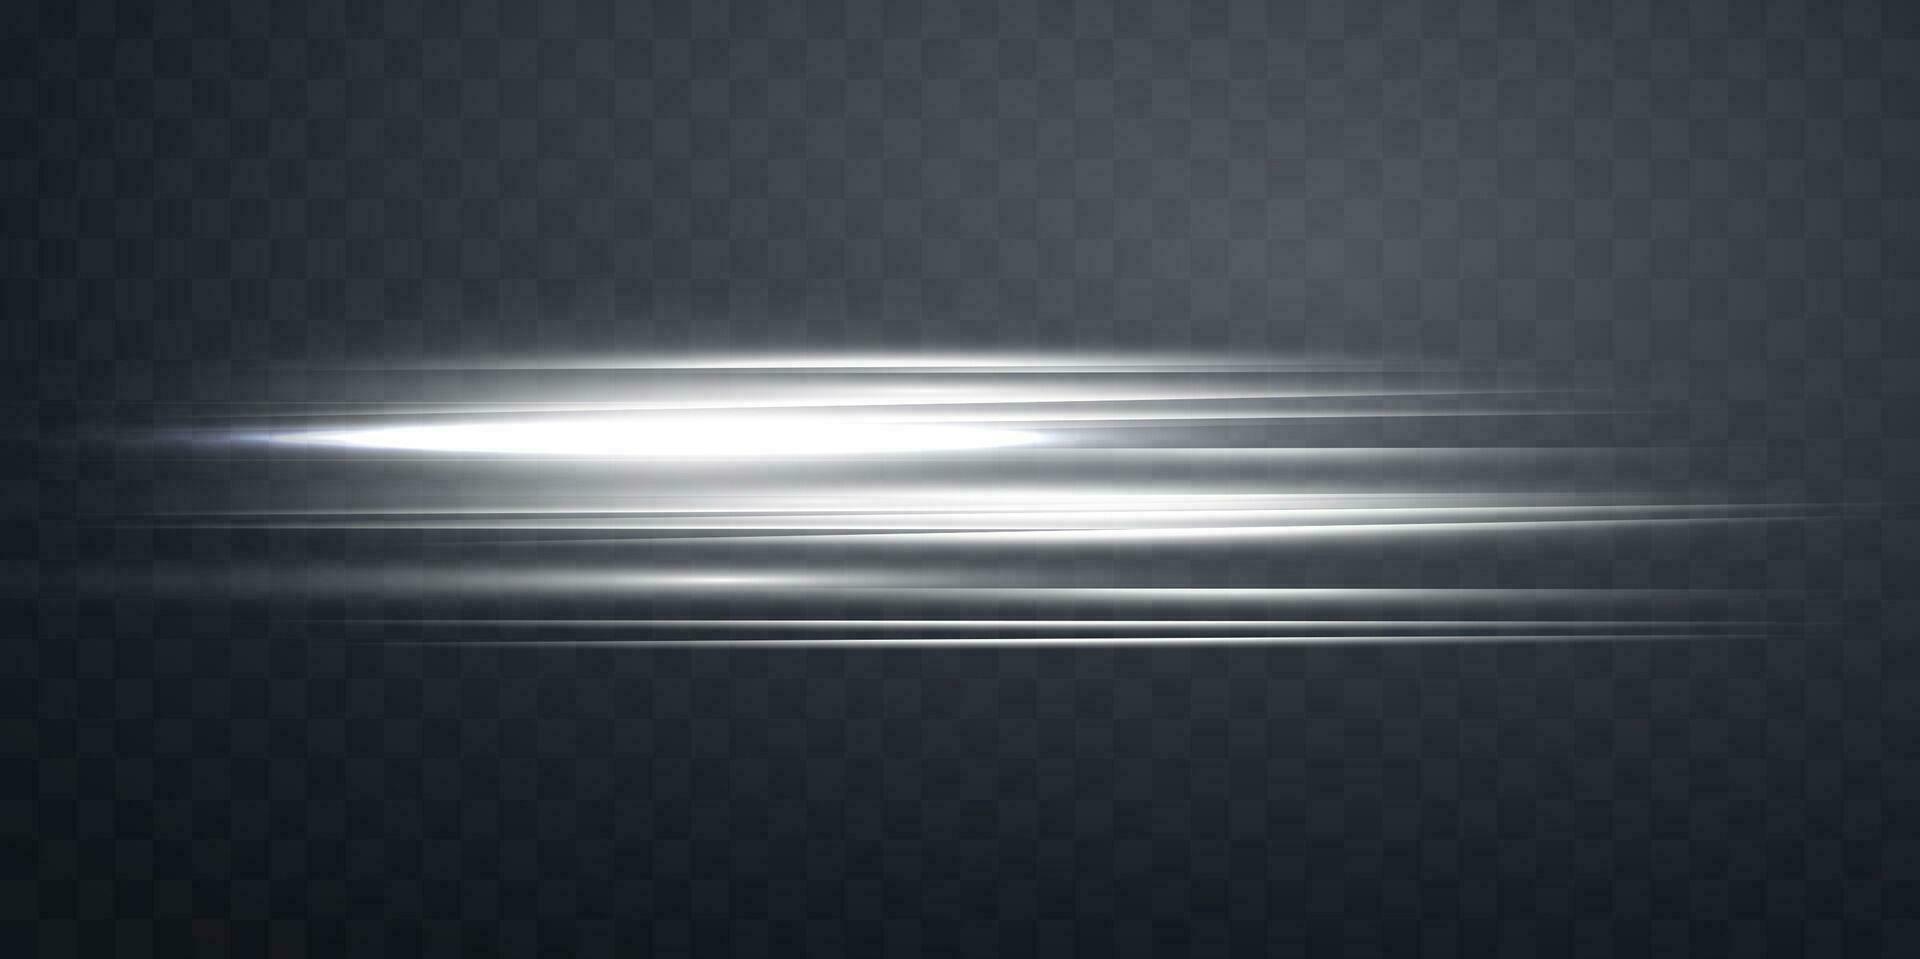 Silver horizontal lensflare. Light flash with rays or spotlight and bokeh. Silver glow flare light effect. Vector illustration.